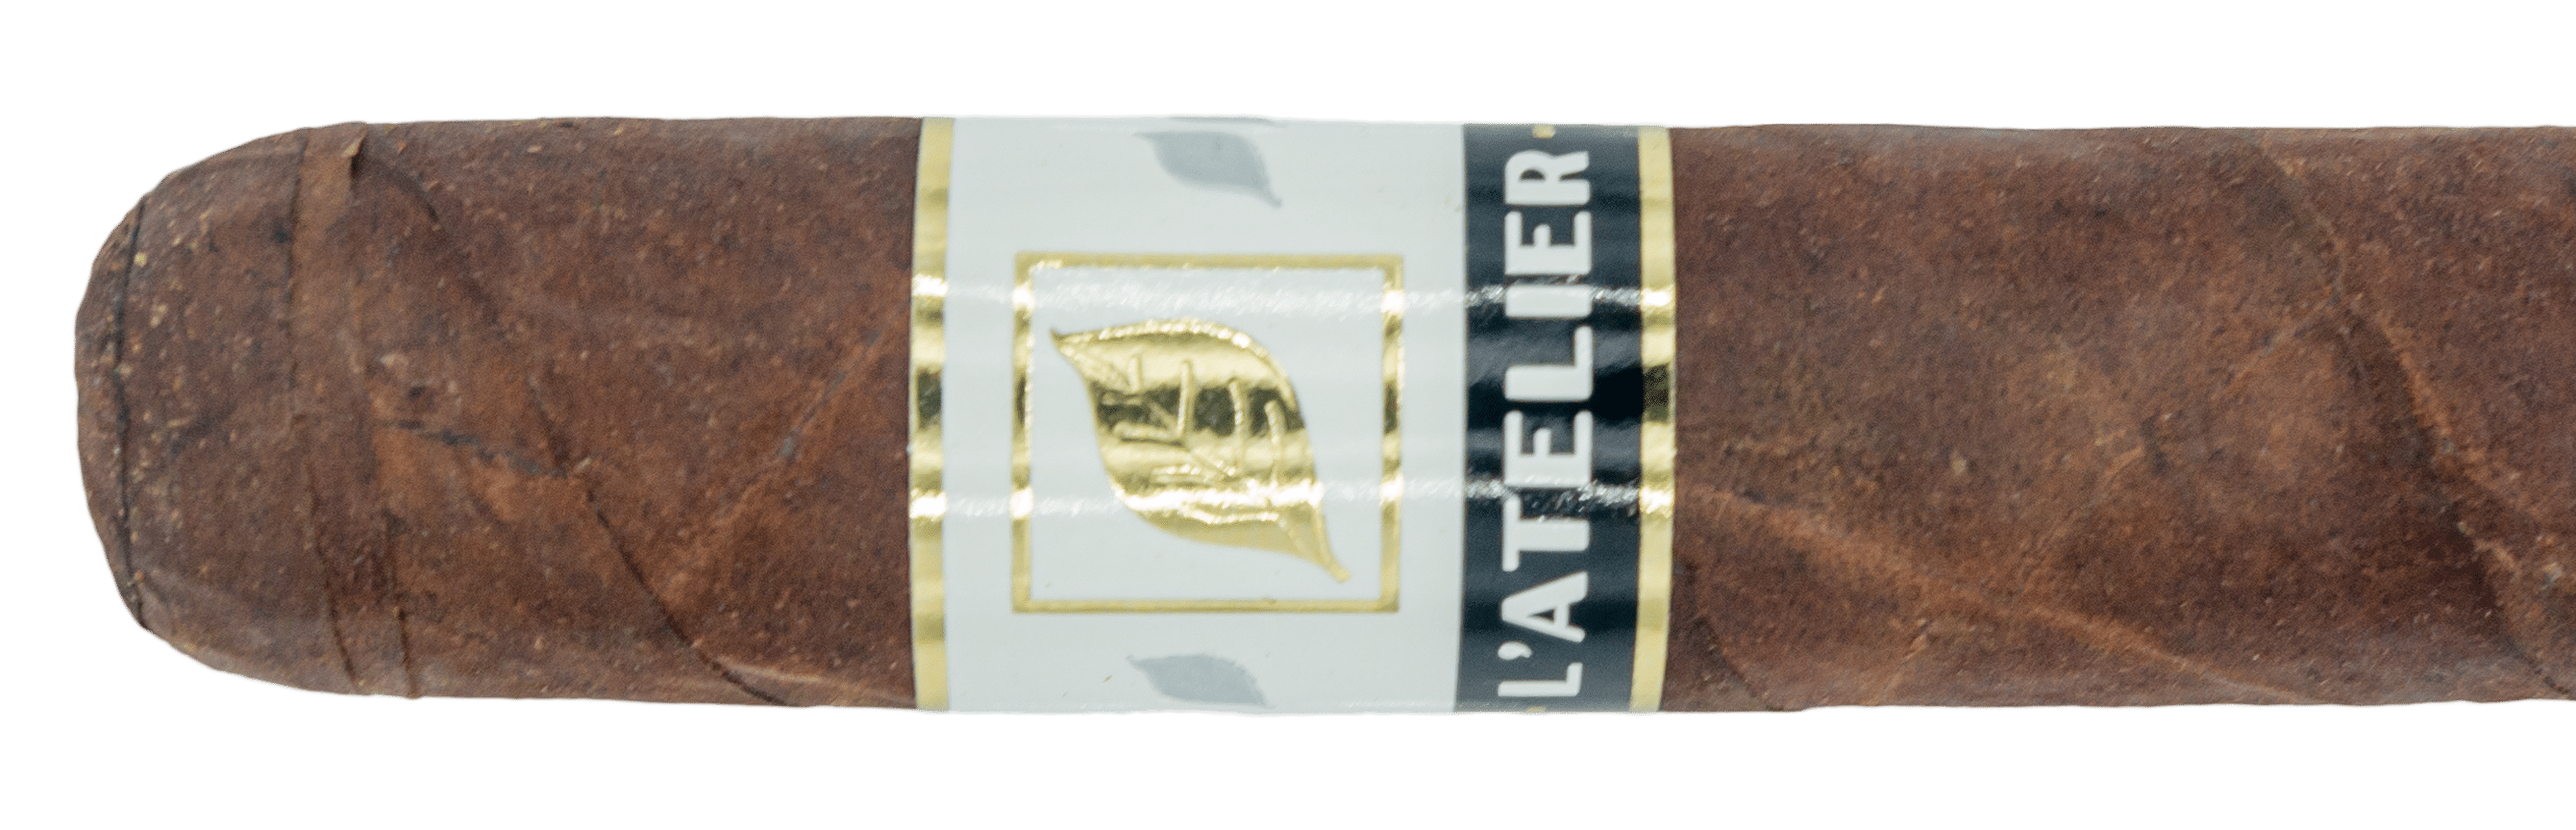 L’Atelier Roxy Maduro - Blind Cigar Review